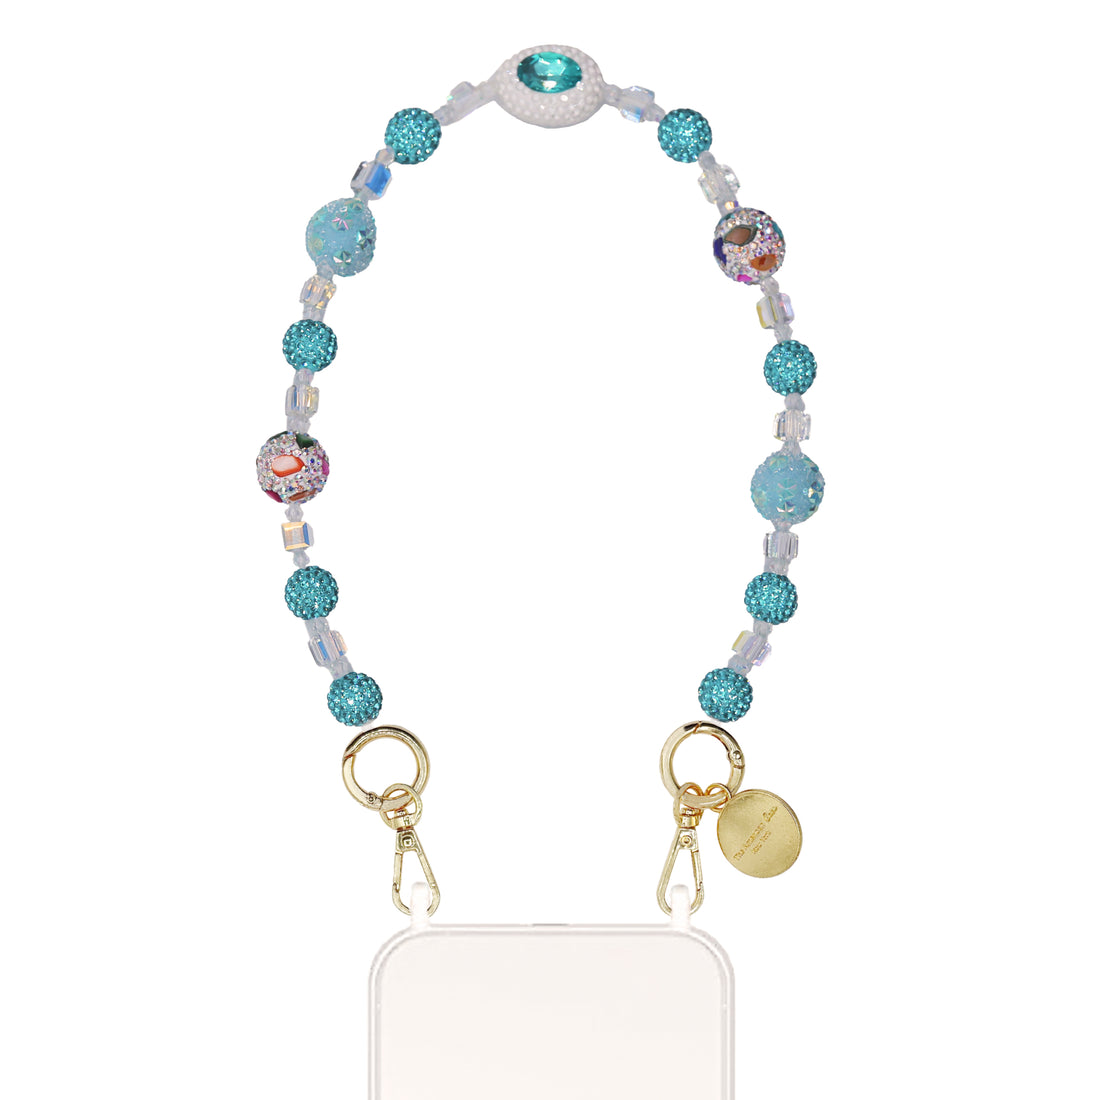 Caroline - Blue Crystal Beads Short Phone Chain with Golden Carabiners